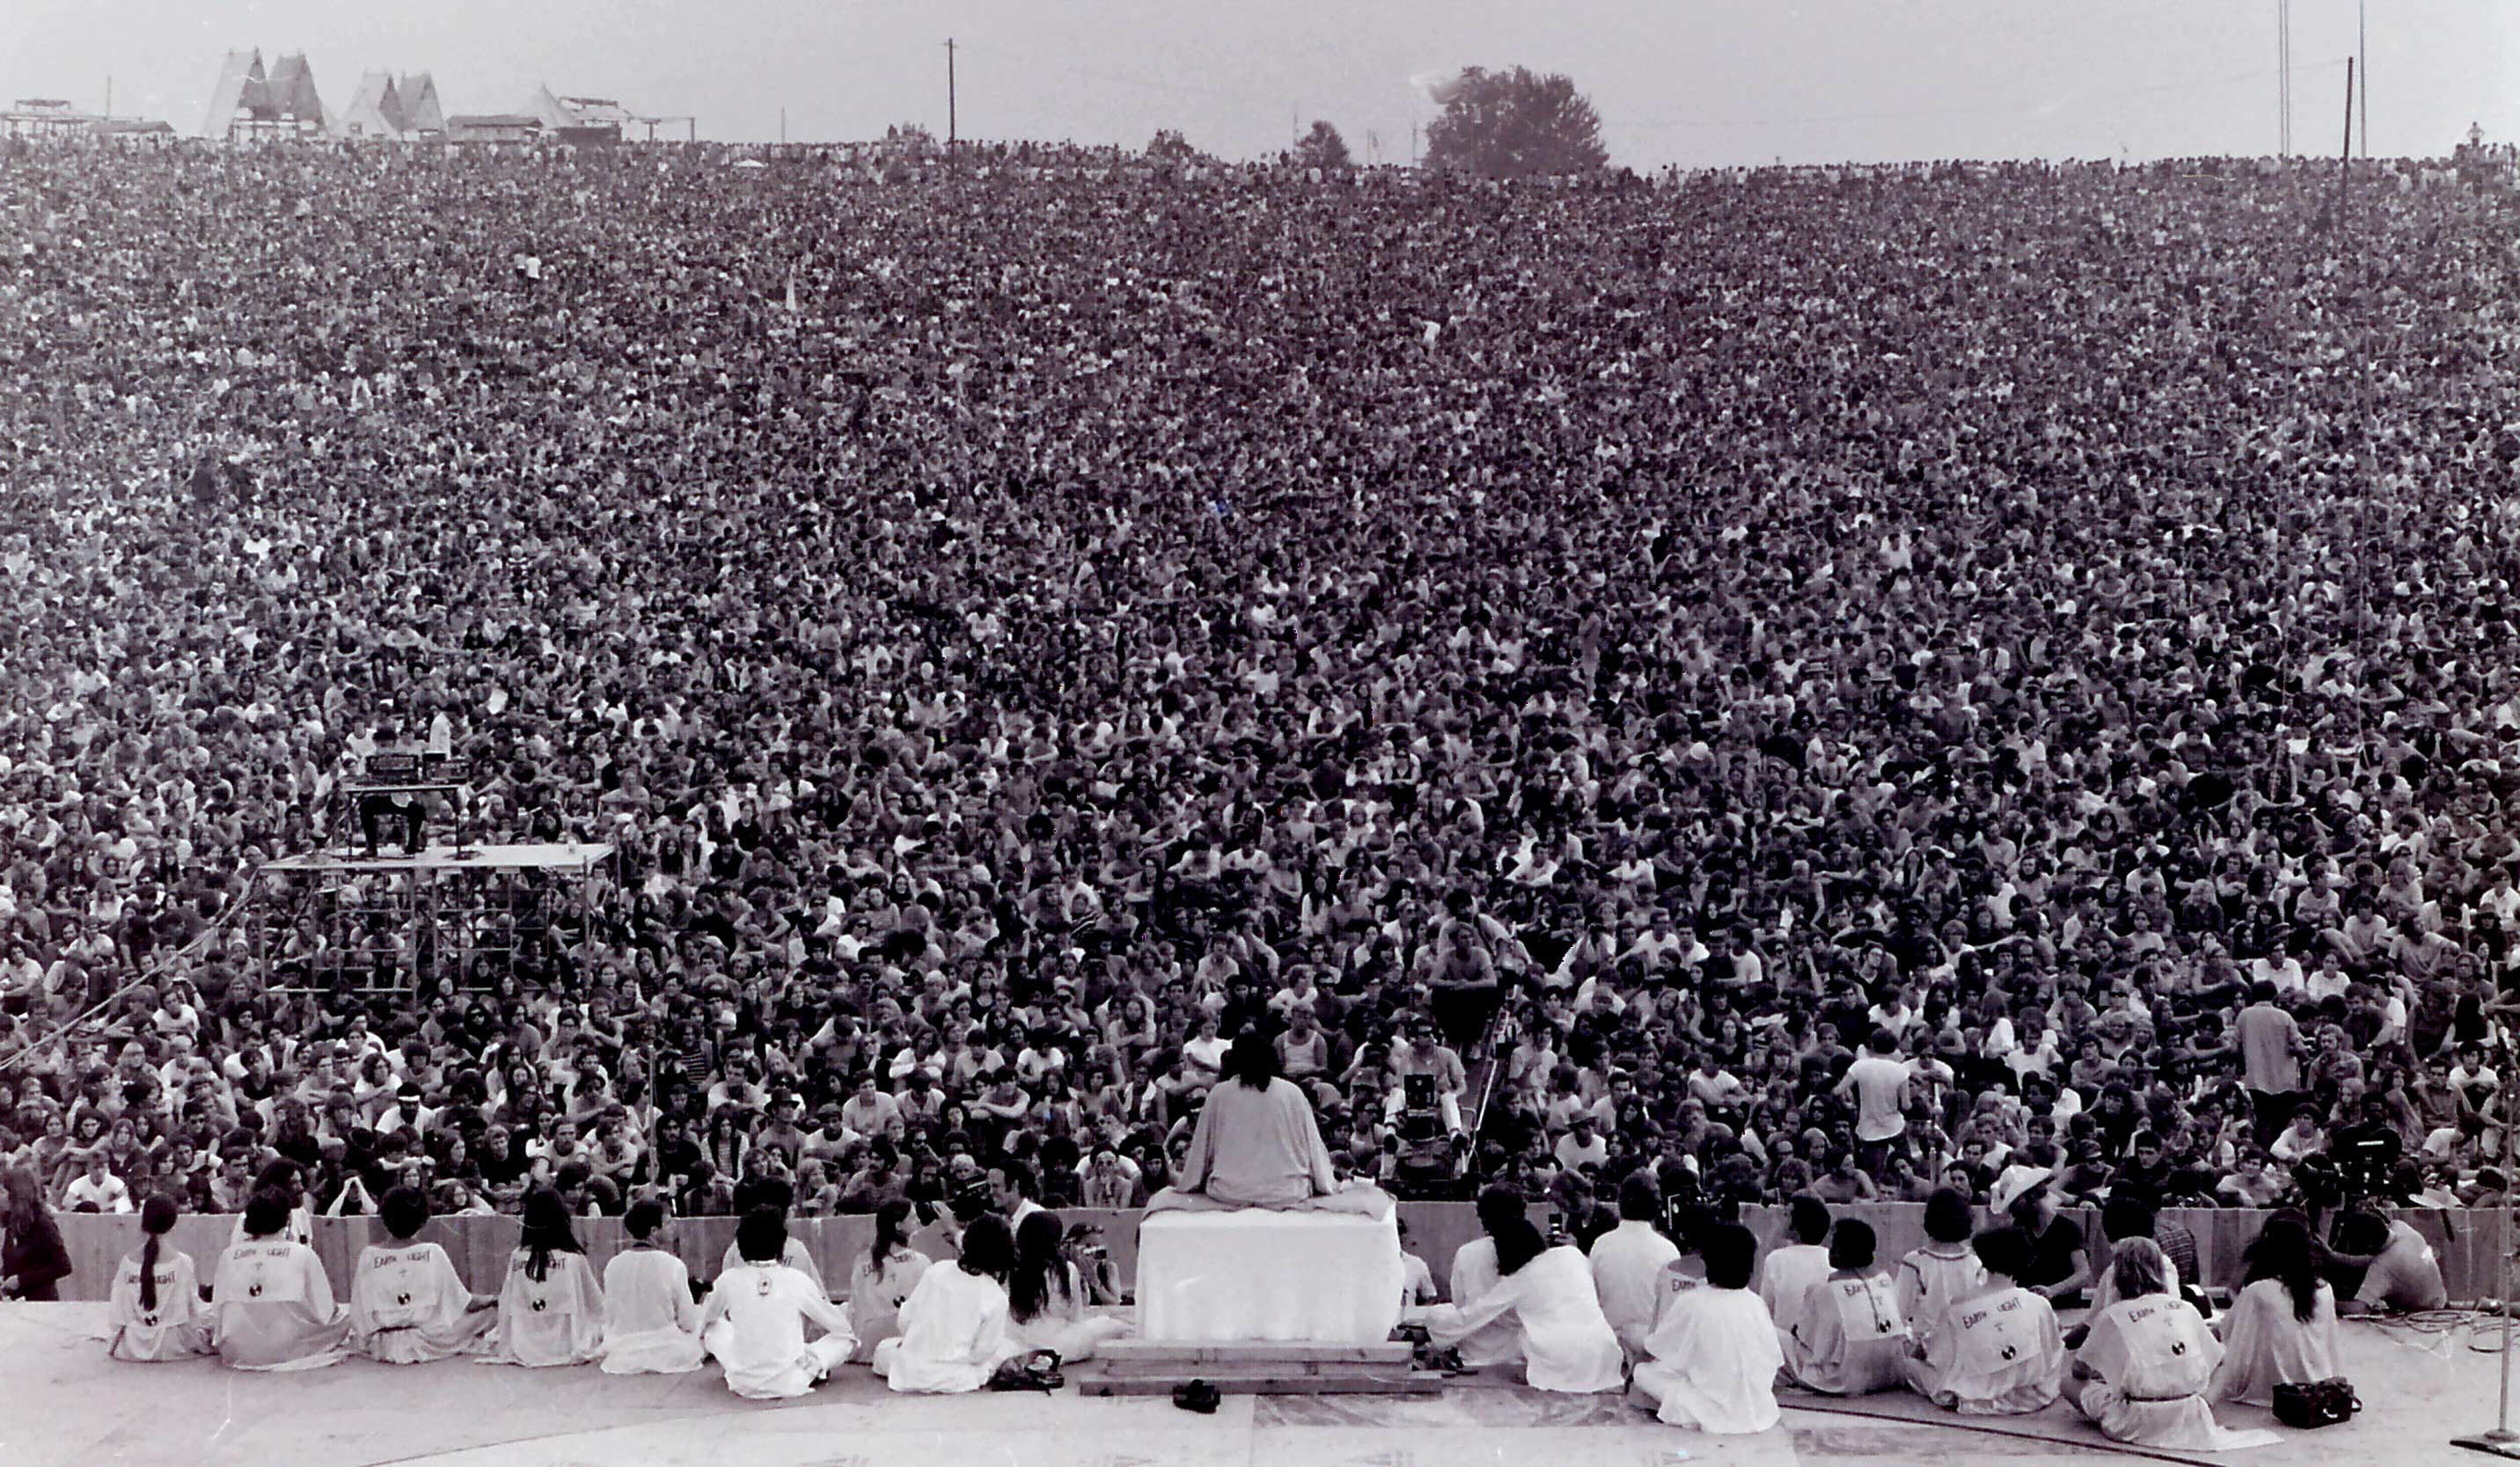 Black and white image of swami at Woodstock